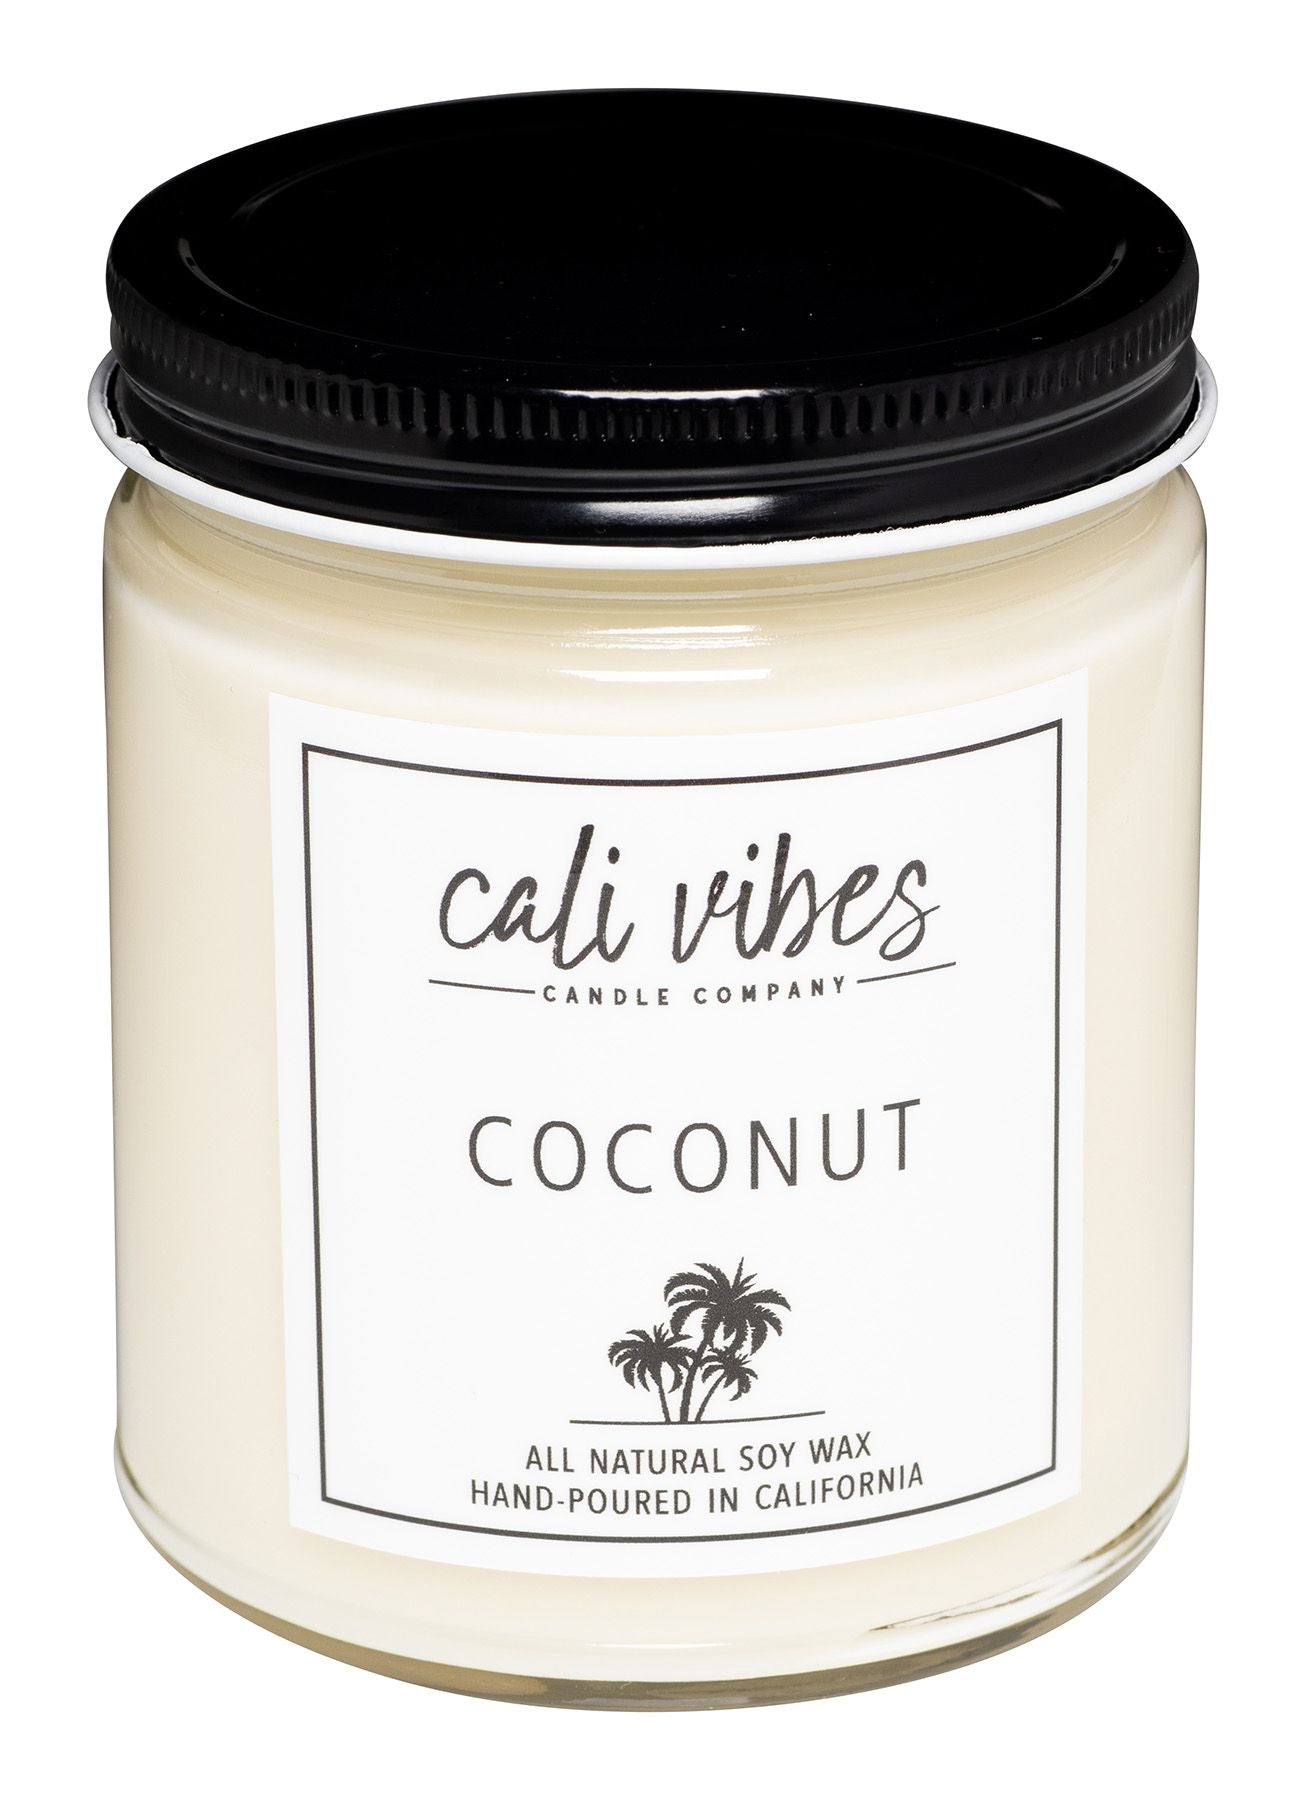 Wholesale Coconut Wax Manufacturer To Meet All Your Candle Needs